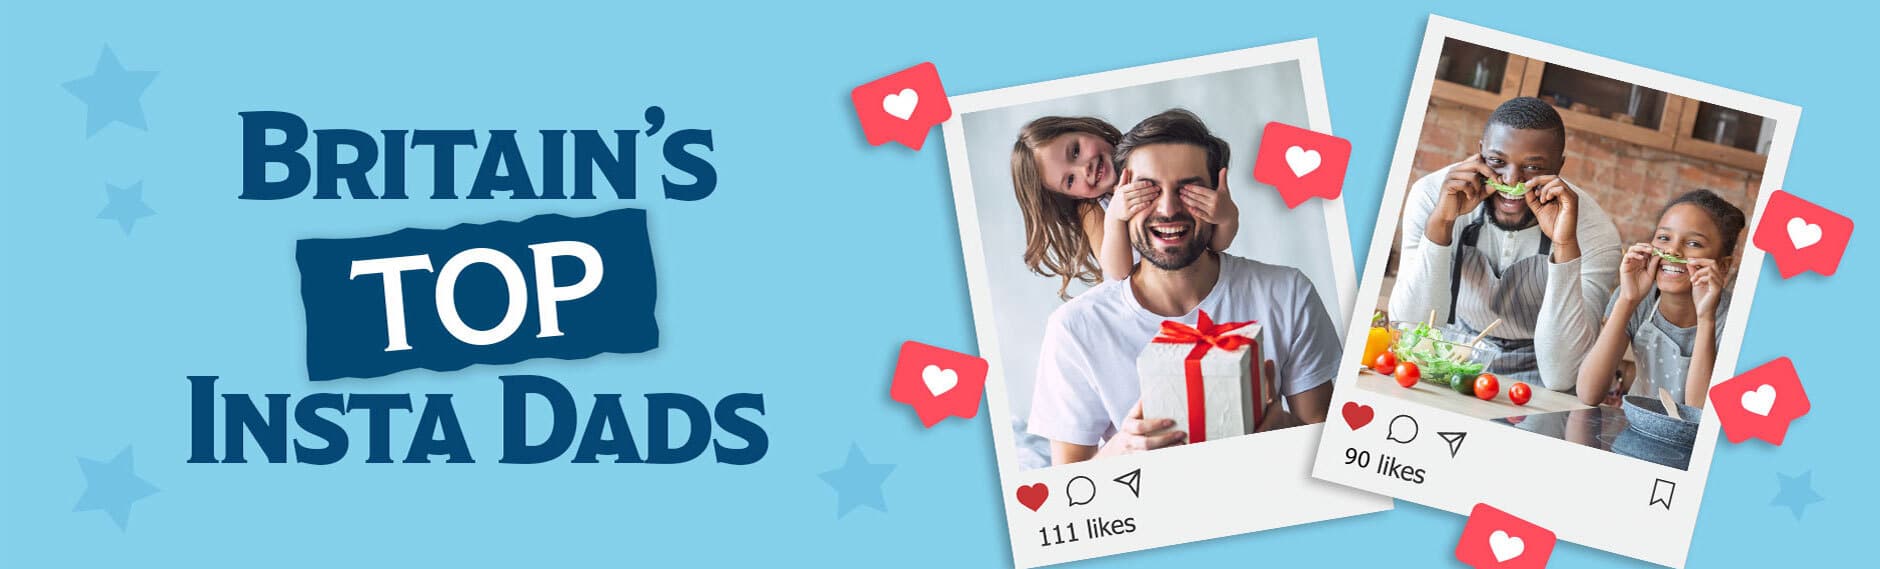 Top UK Locations For Instagrammer Dads